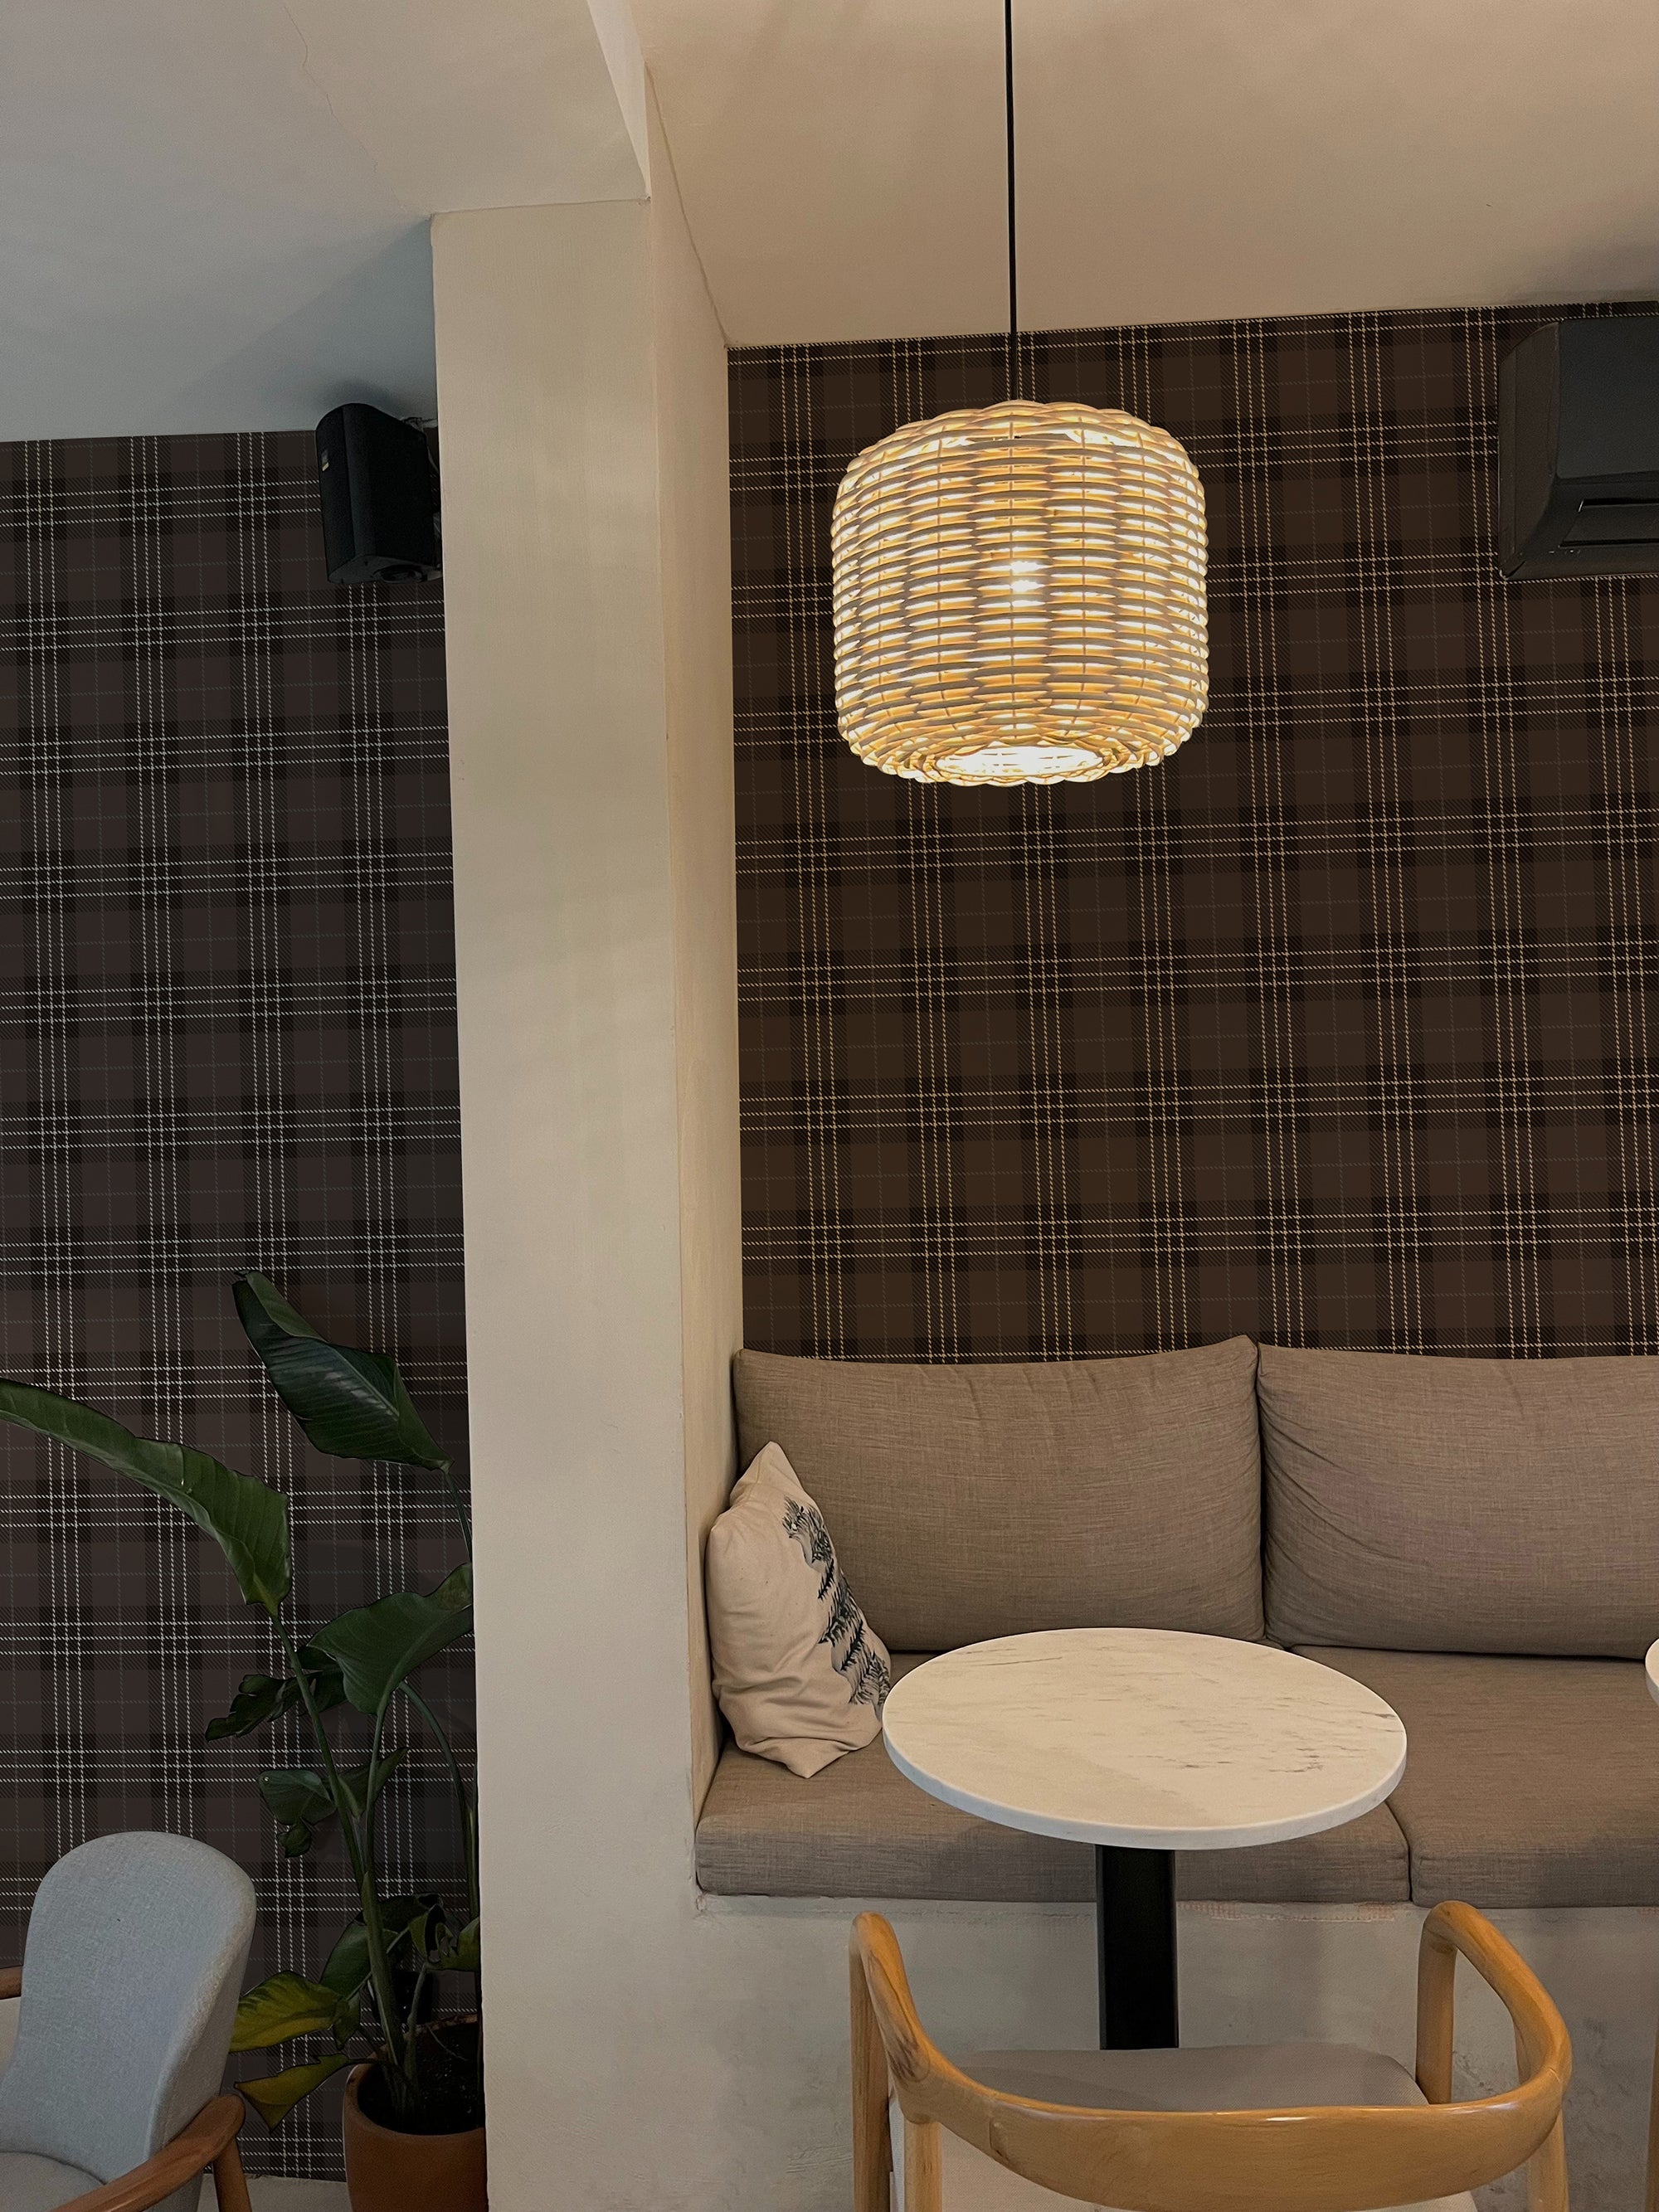 A cozy corner of a modern cafe, illuminated by a woven pendant lamp, showcasing walls covered in Dark Plaid Wallpaper - Black with a subtle black and white check pattern. The area features a comfortable seating nook with grey cushions, a round table, and a natural wood chair, creating an inviting space for patrons.